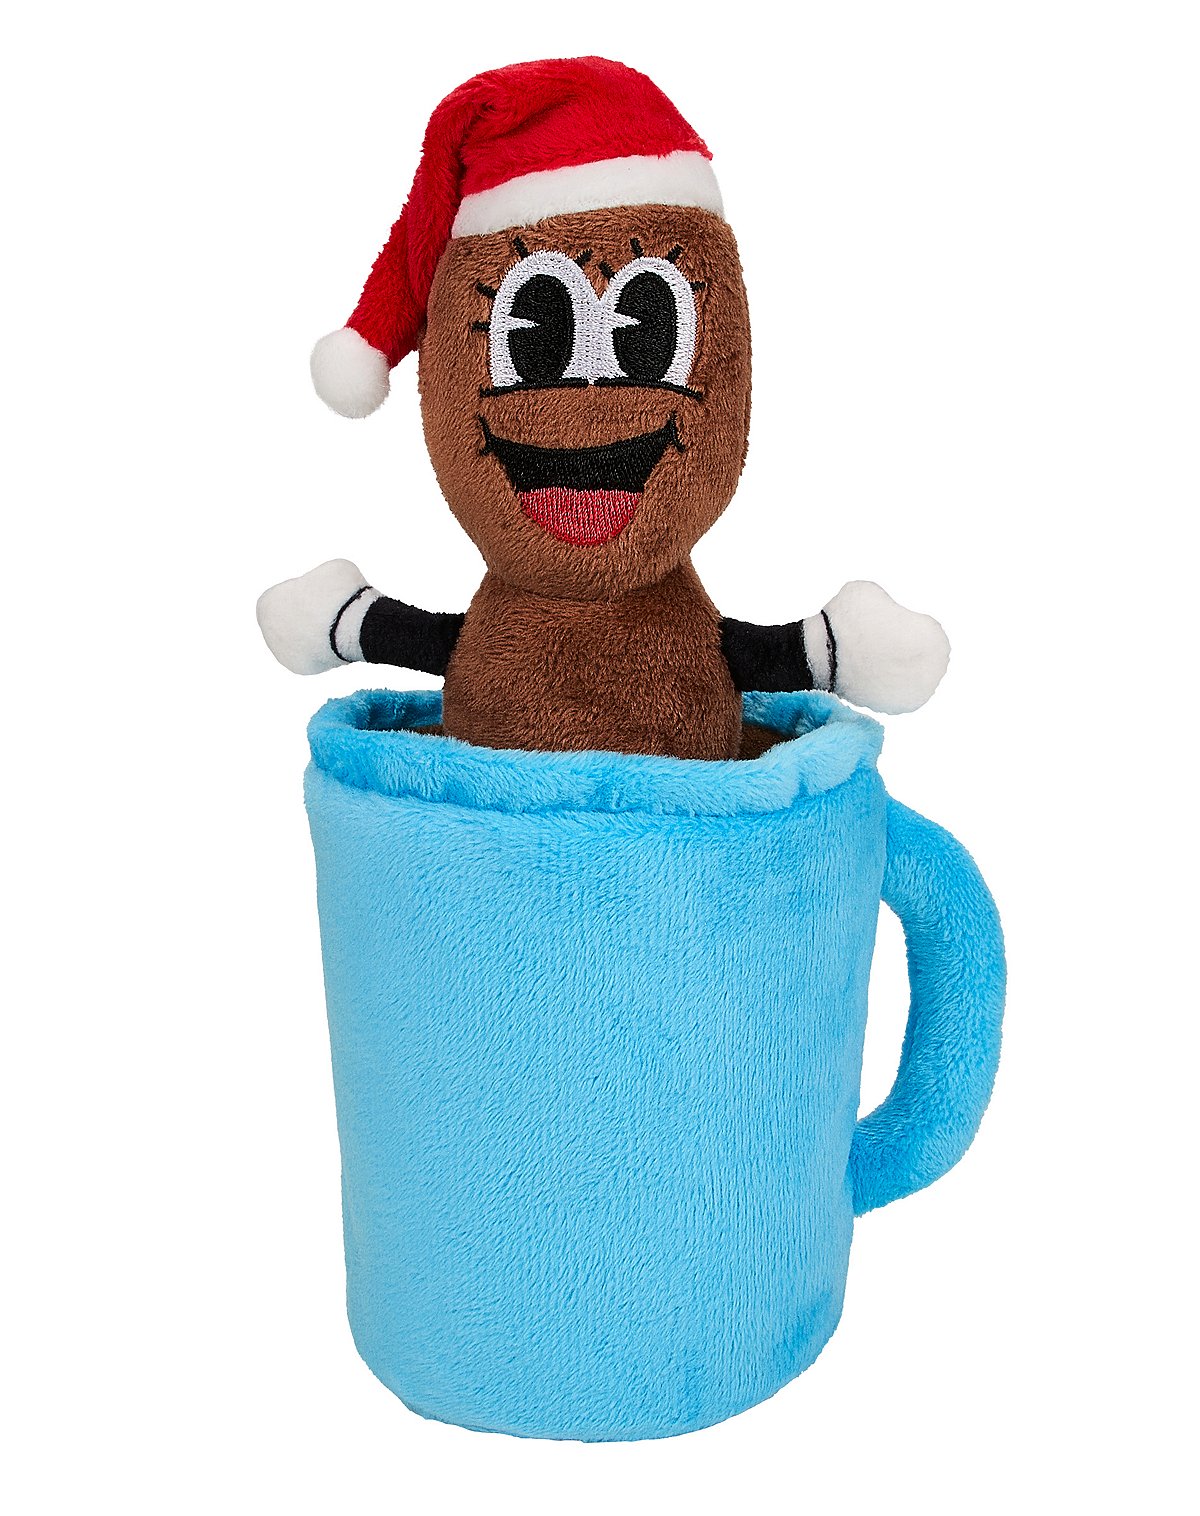 chase martins recommends mr hankey adult toys pic